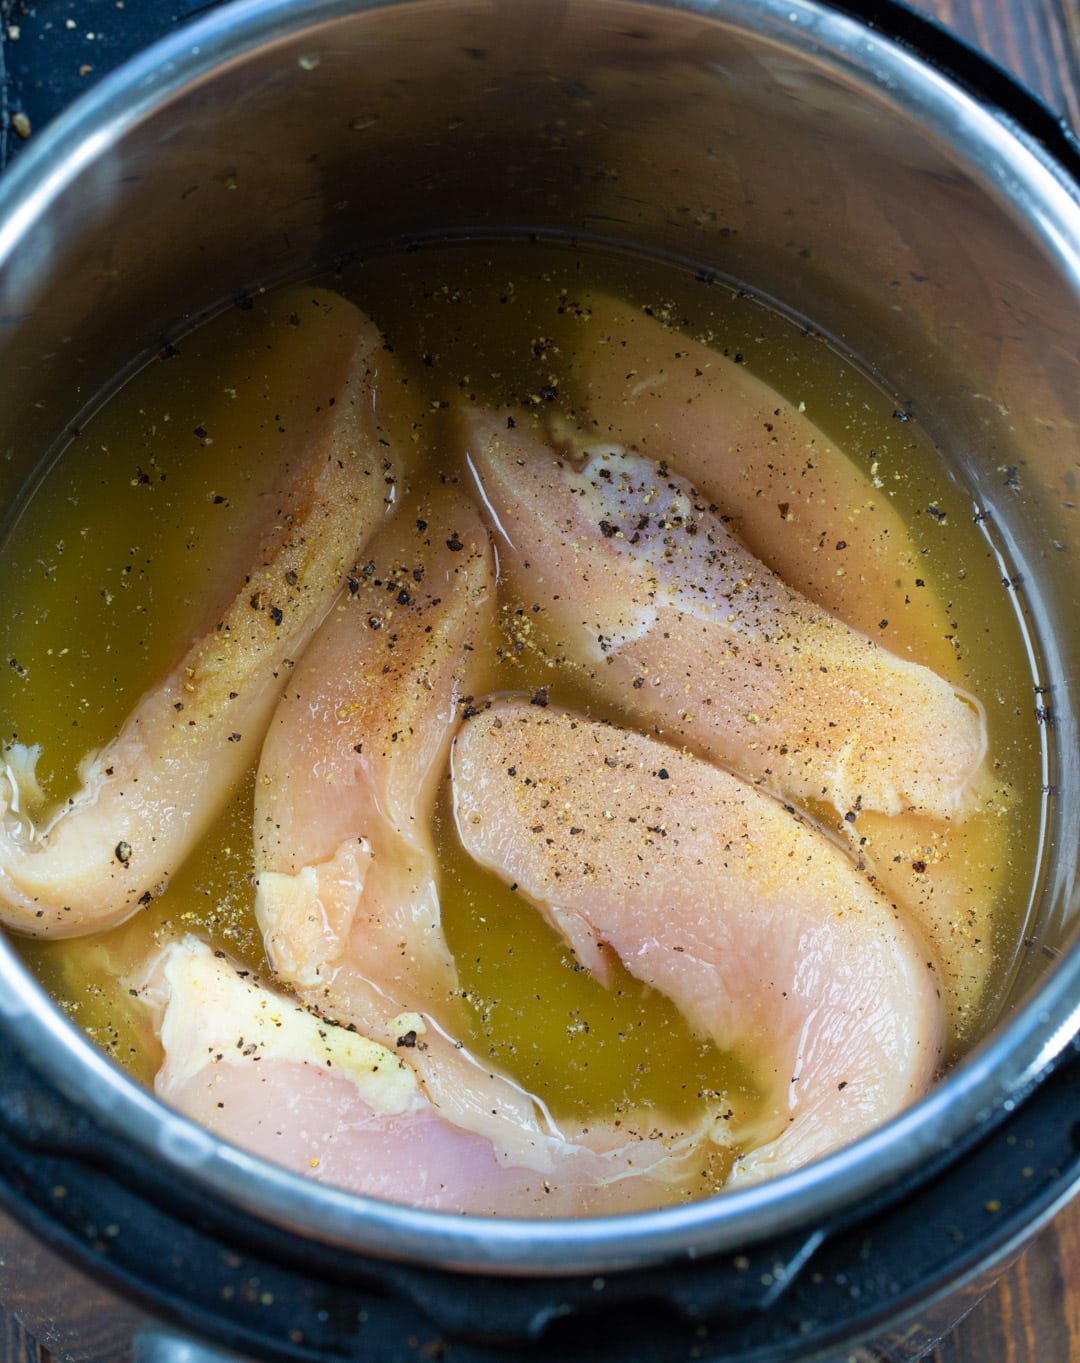 Chicken and chicken broth in the instant pot.